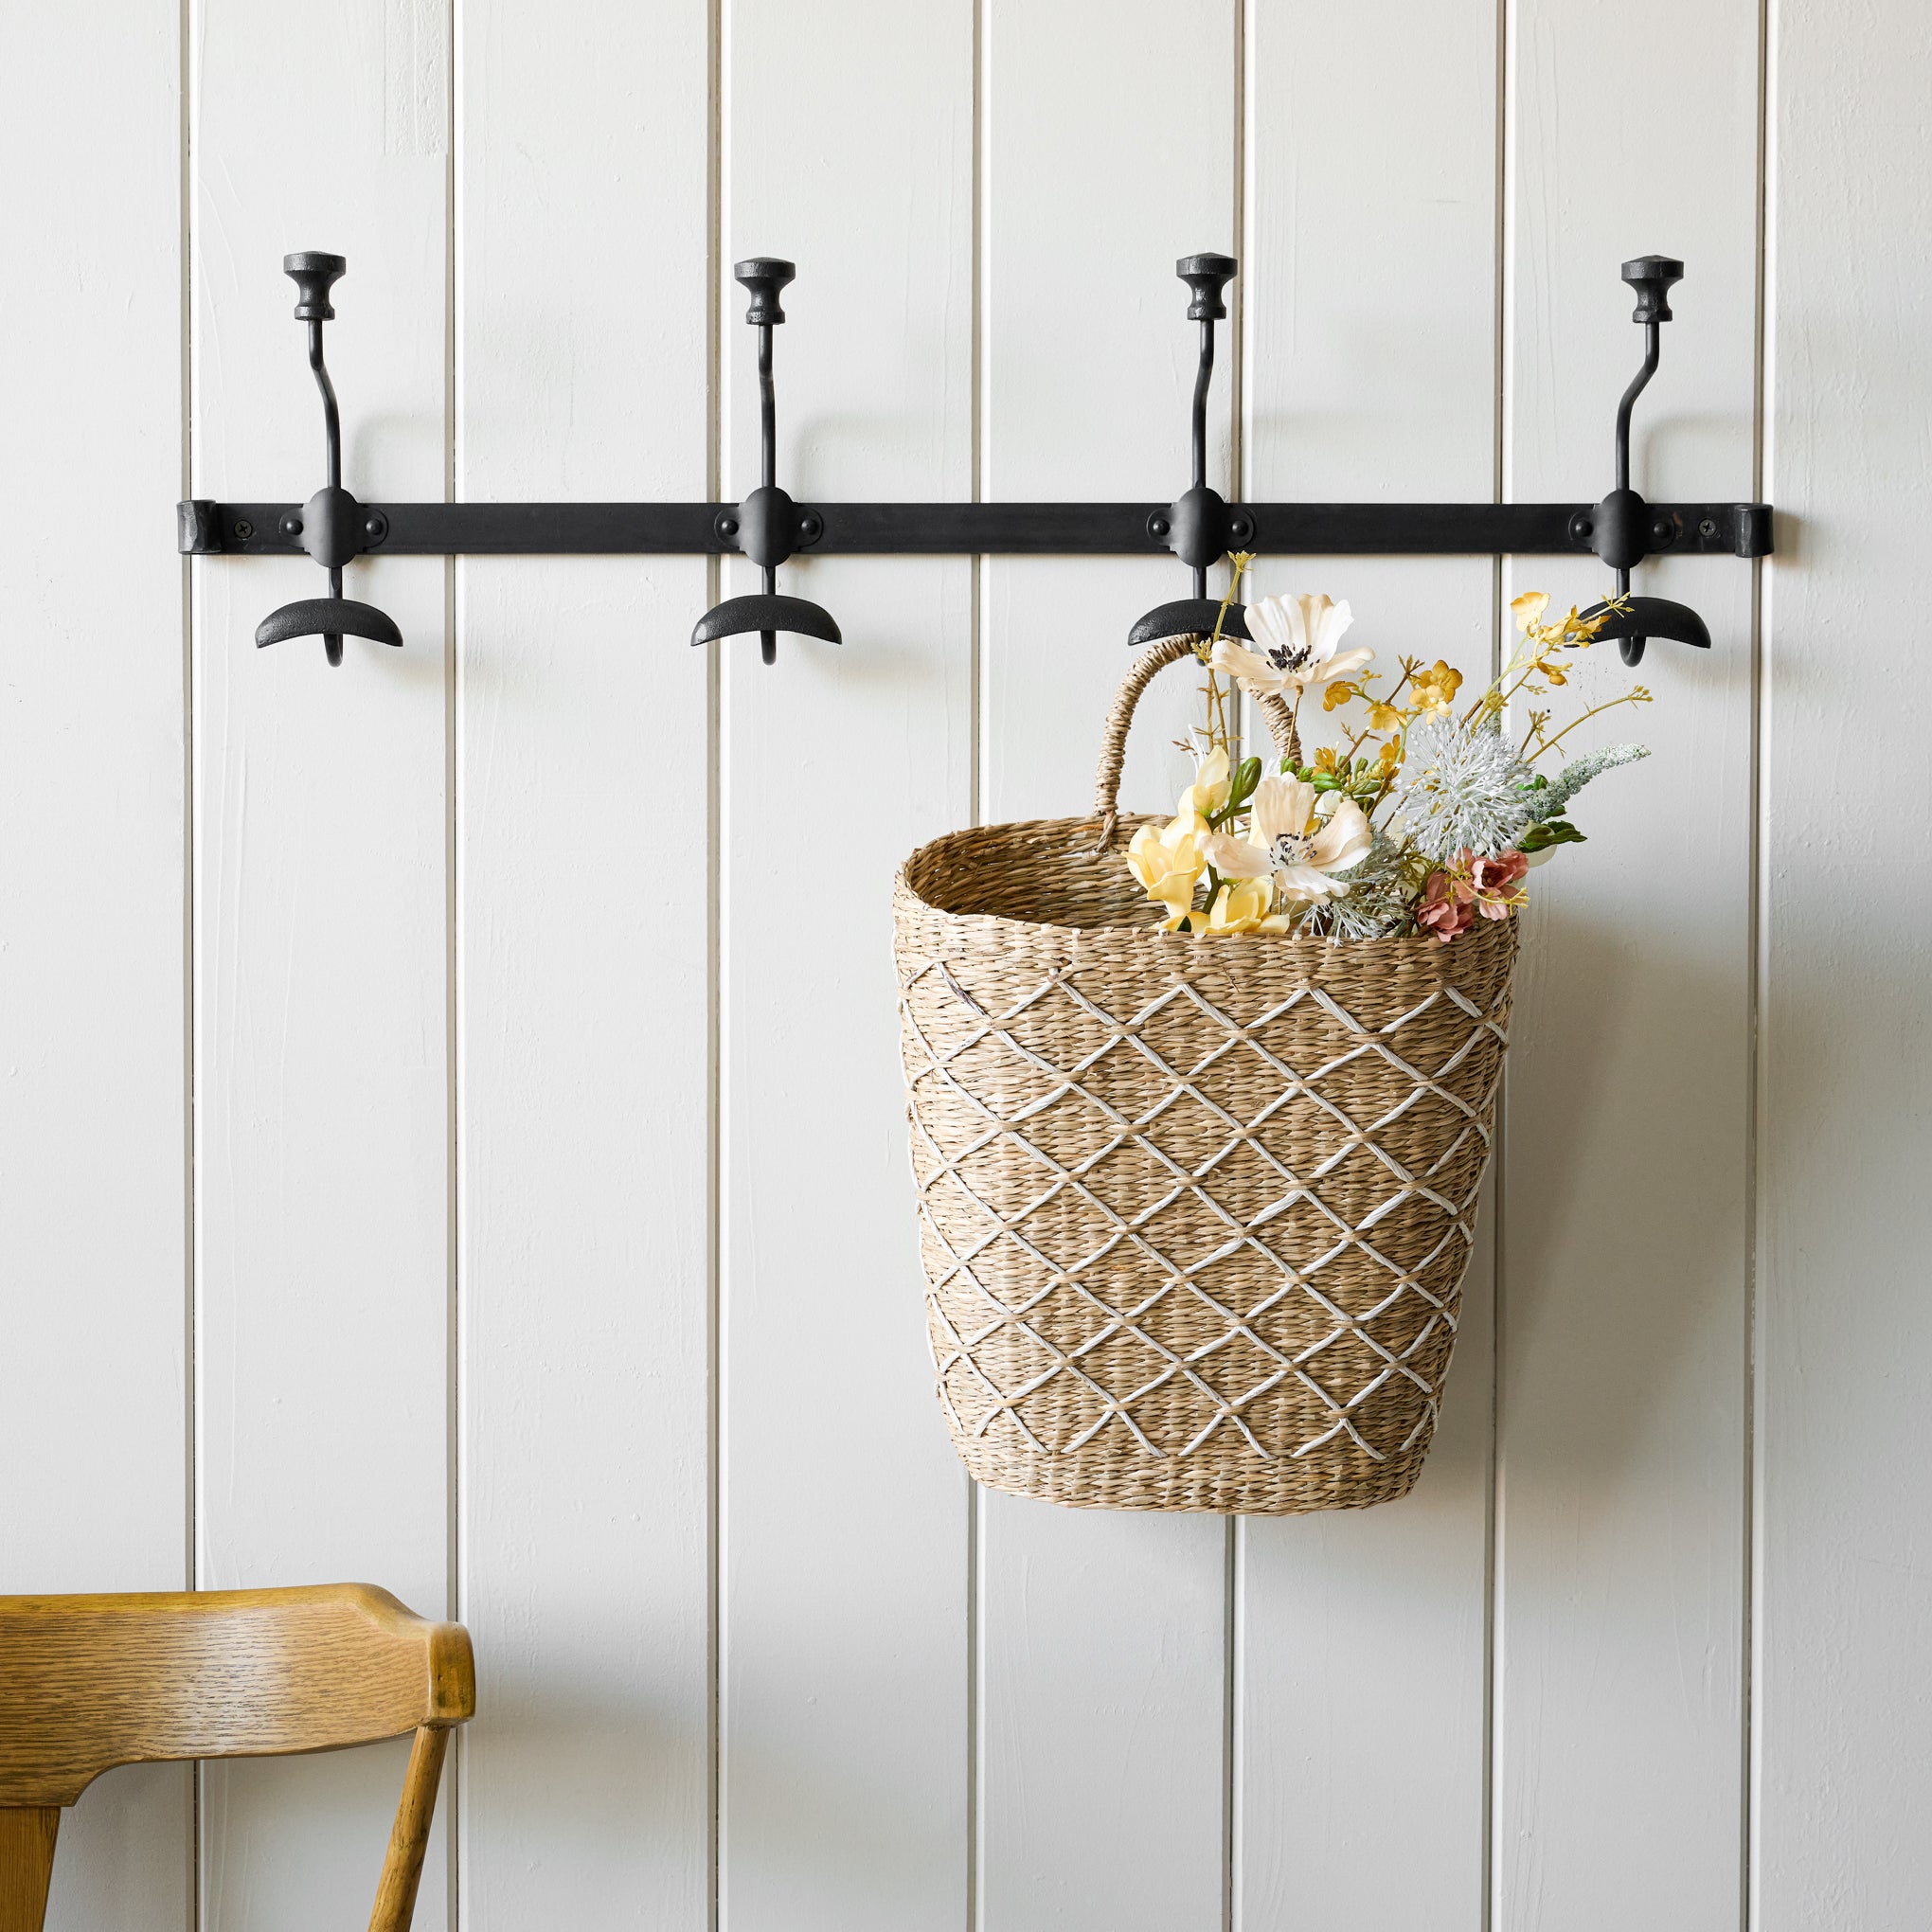 Long duke metal wall hook pictured with wicker basket hanging from one hook. Items range from $44.00 to $58.00